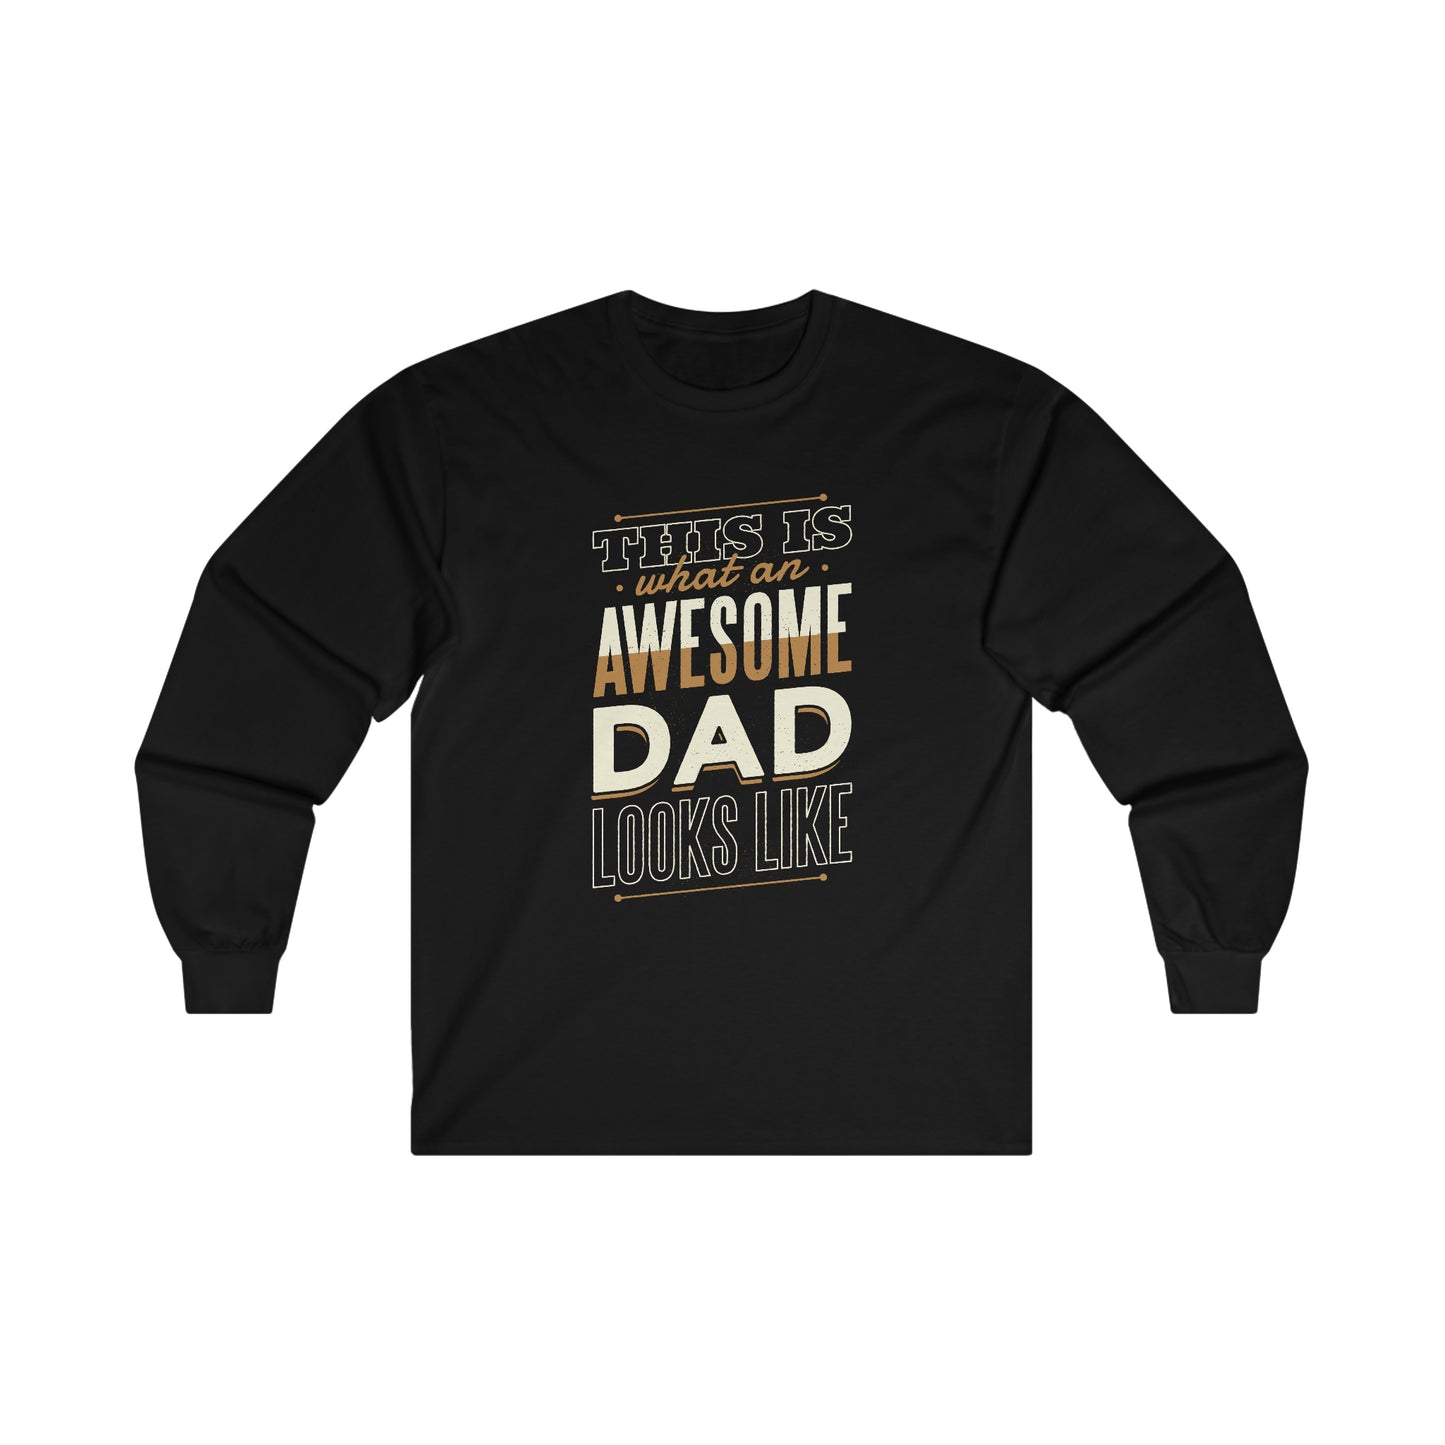 Awesome Dad Ultra Cotton Long Sleeve Tee